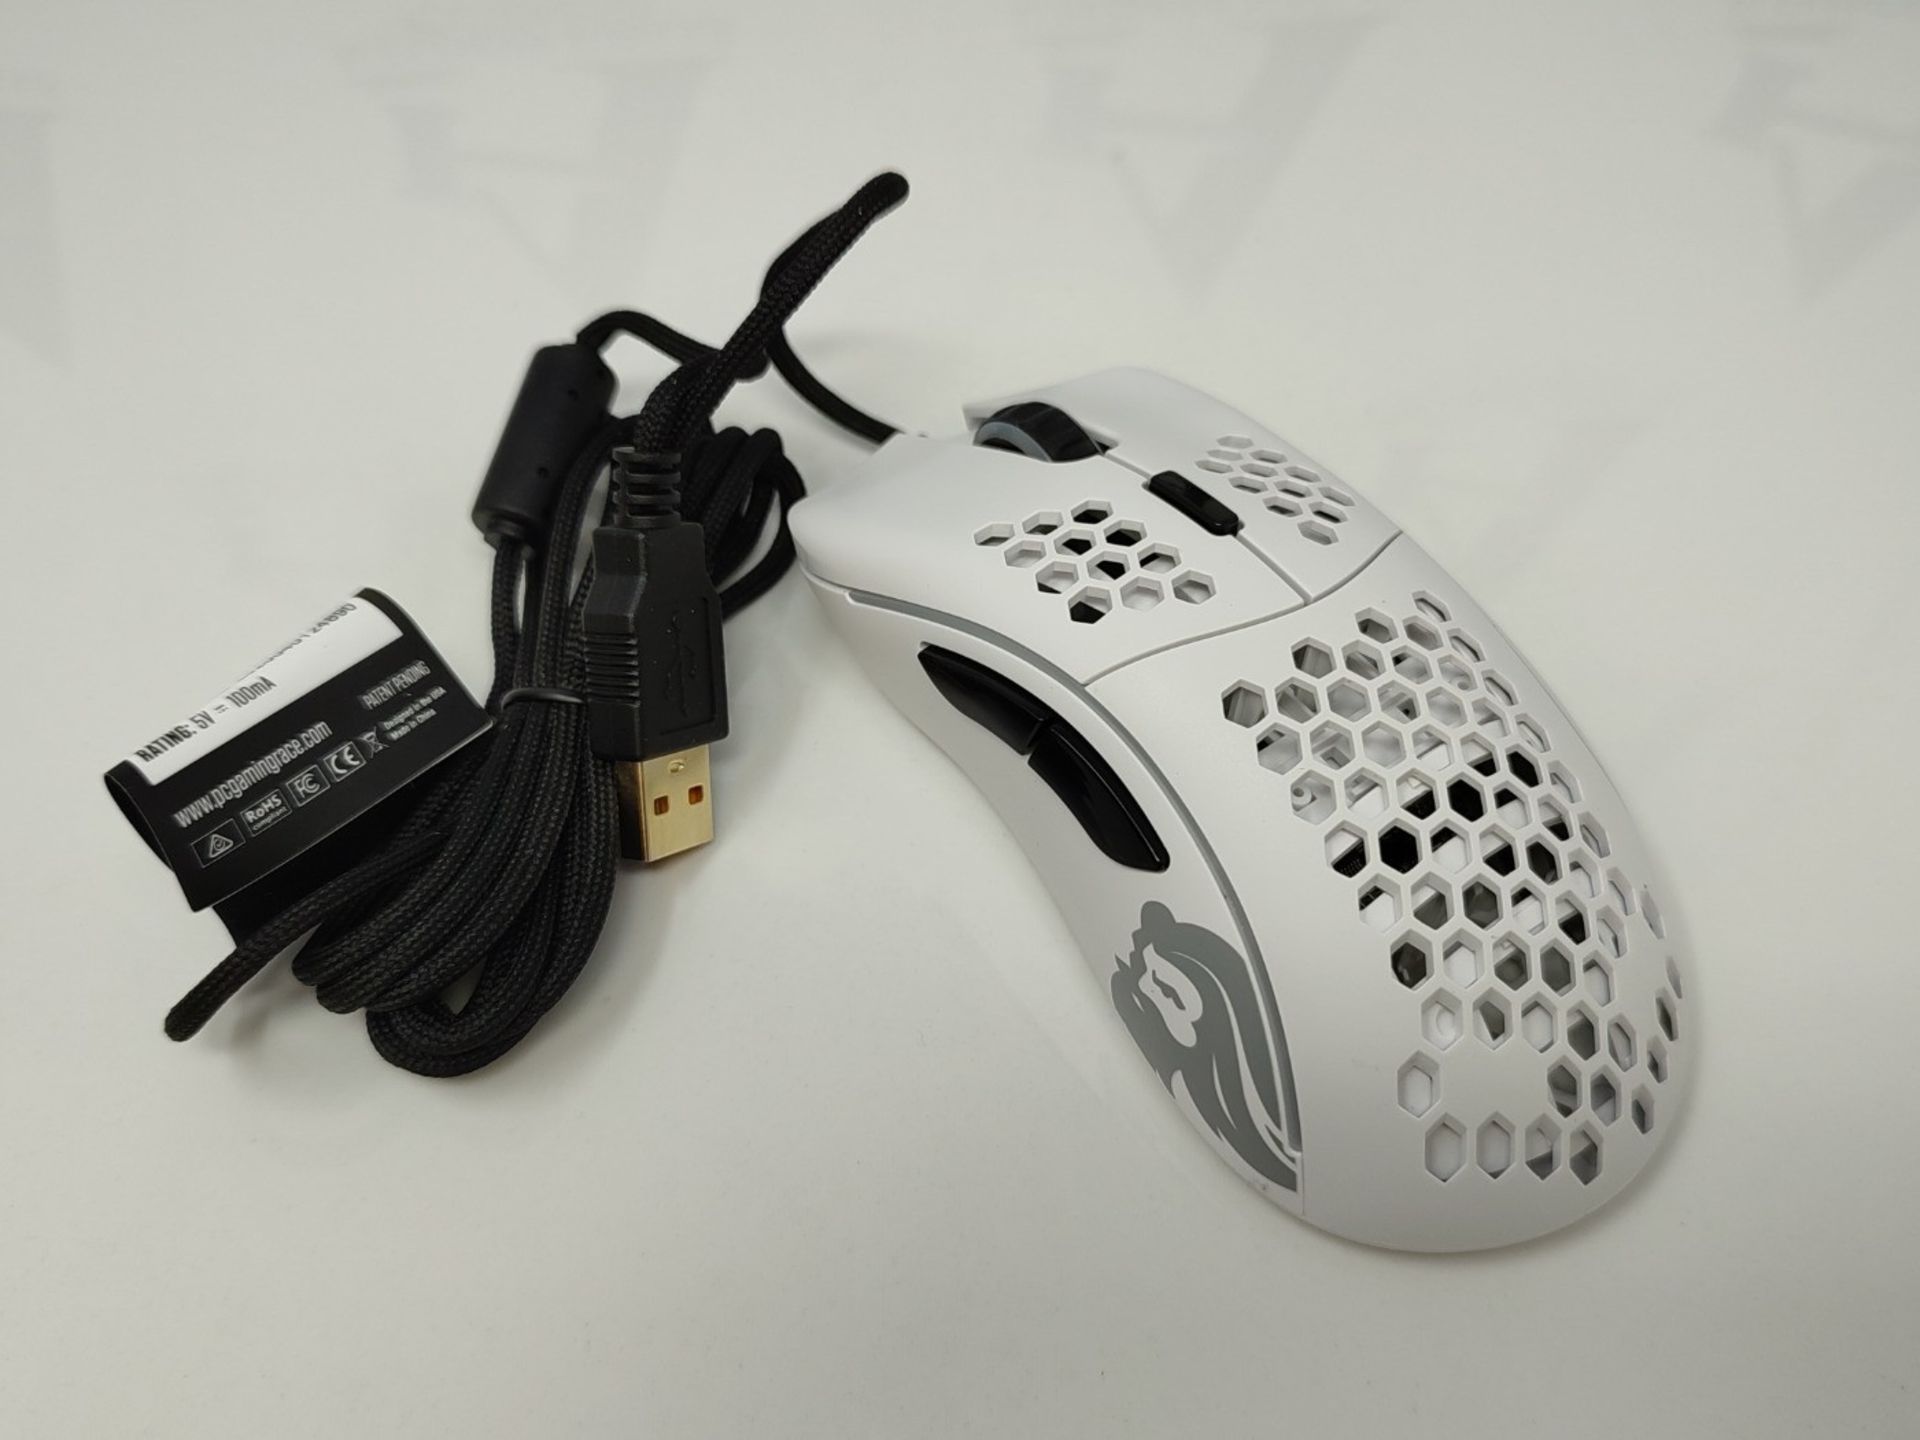 RRP £65.00 Glorious Gaming Model D wired gaming mouse - Superlight 68g, honeycomb design, RGB, er - Image 2 of 3